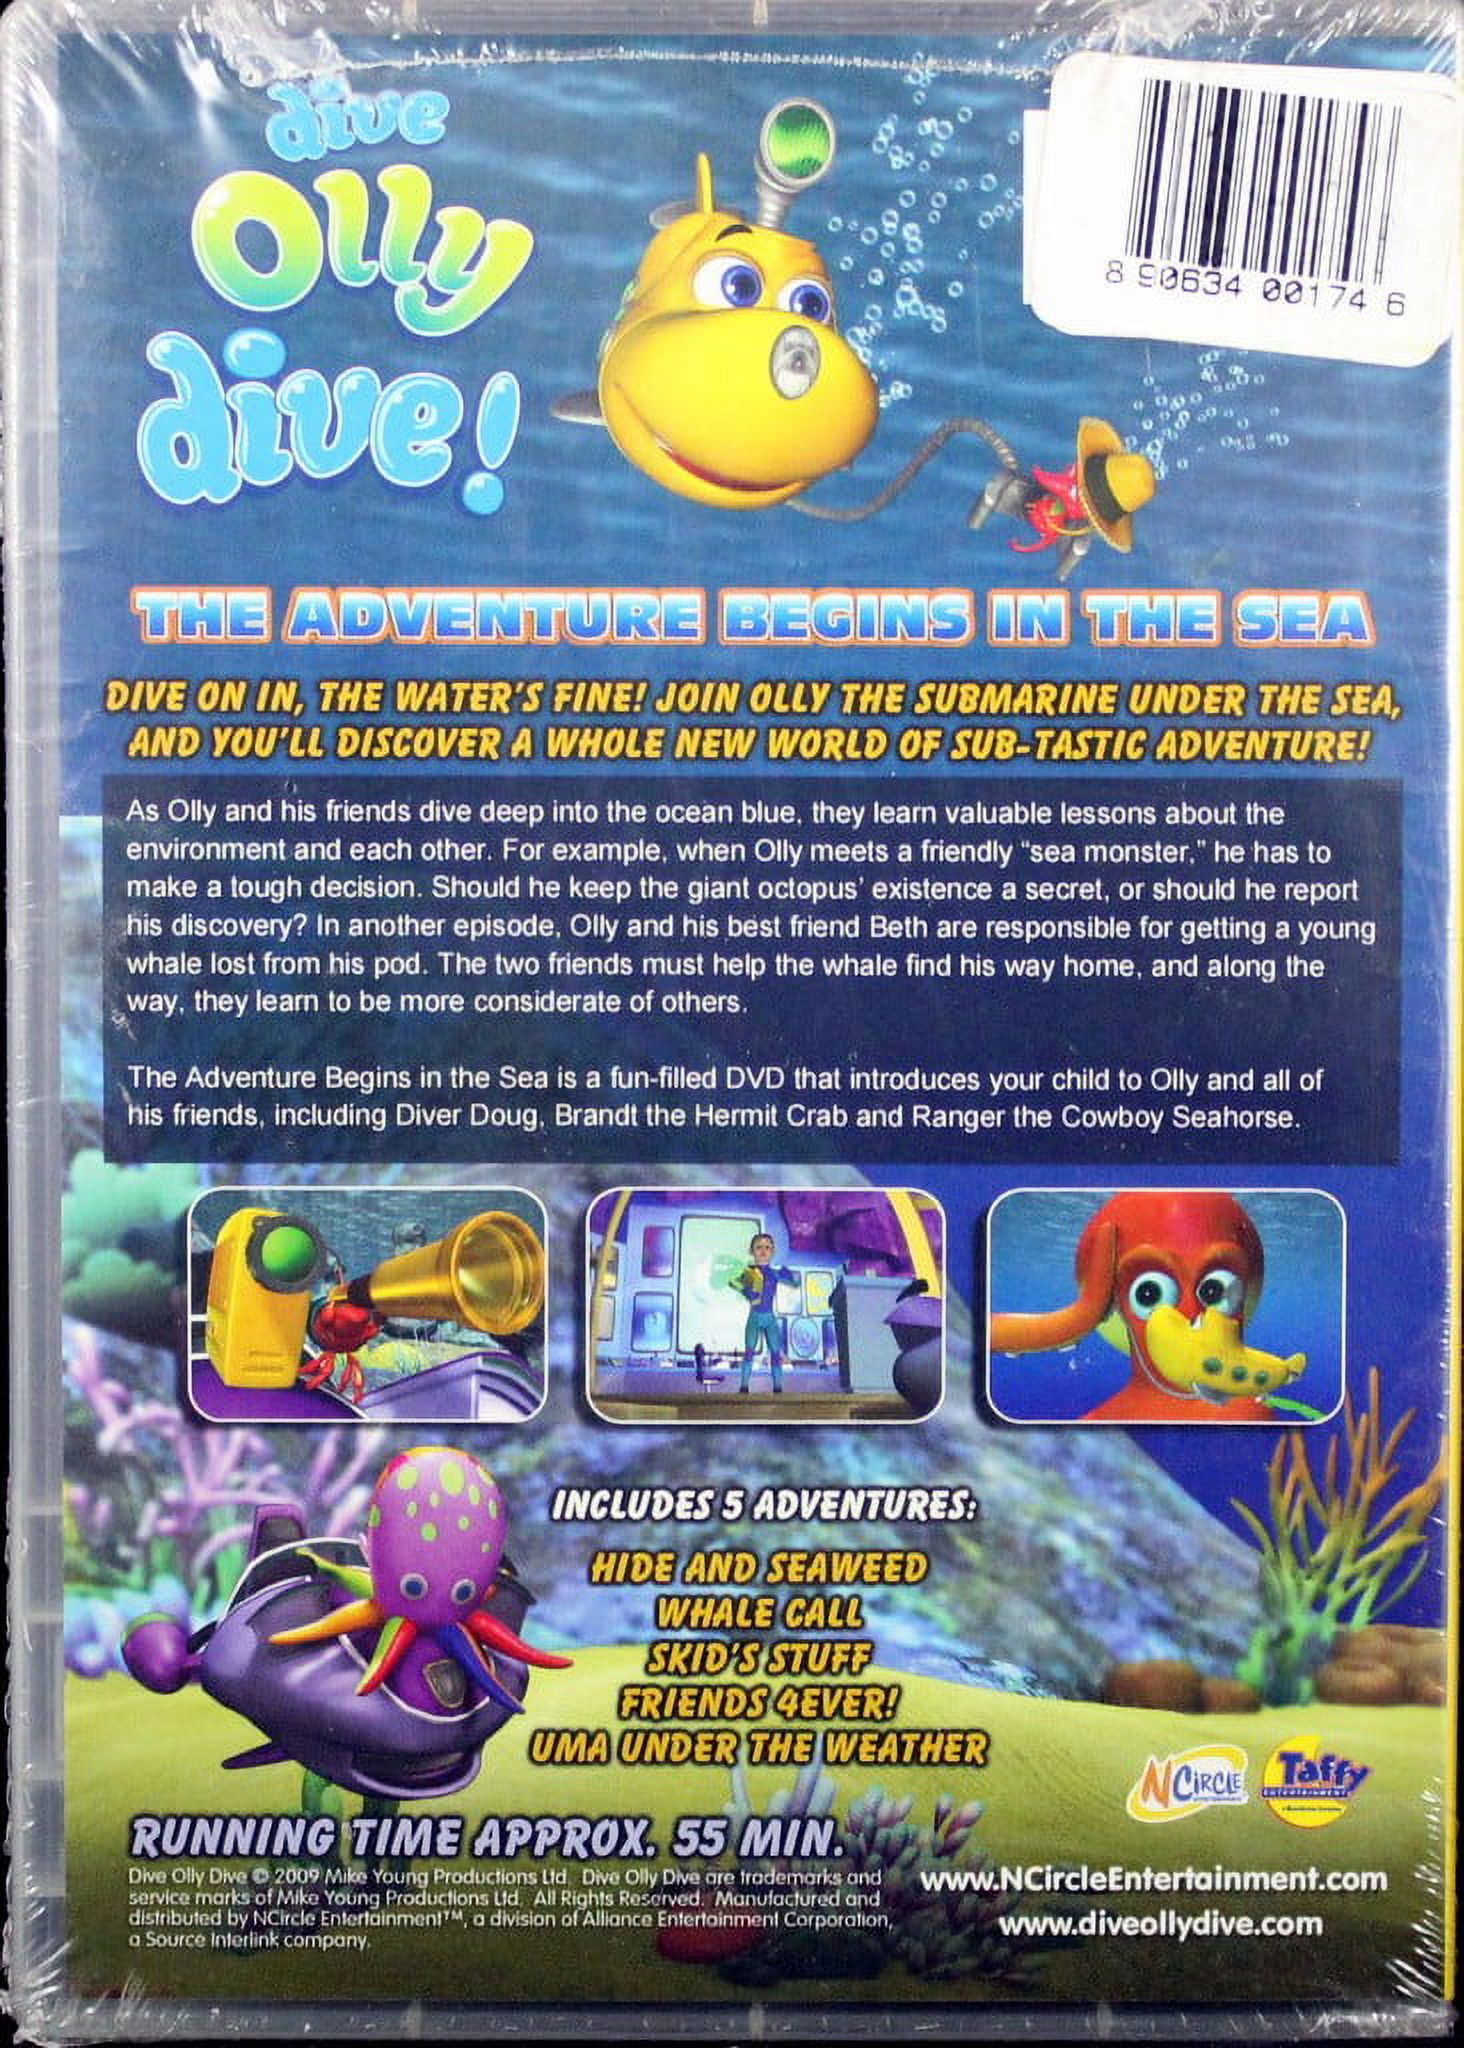 Adventure Begins in the Sea (DVD), Dive Olly Dive, Kids & Family